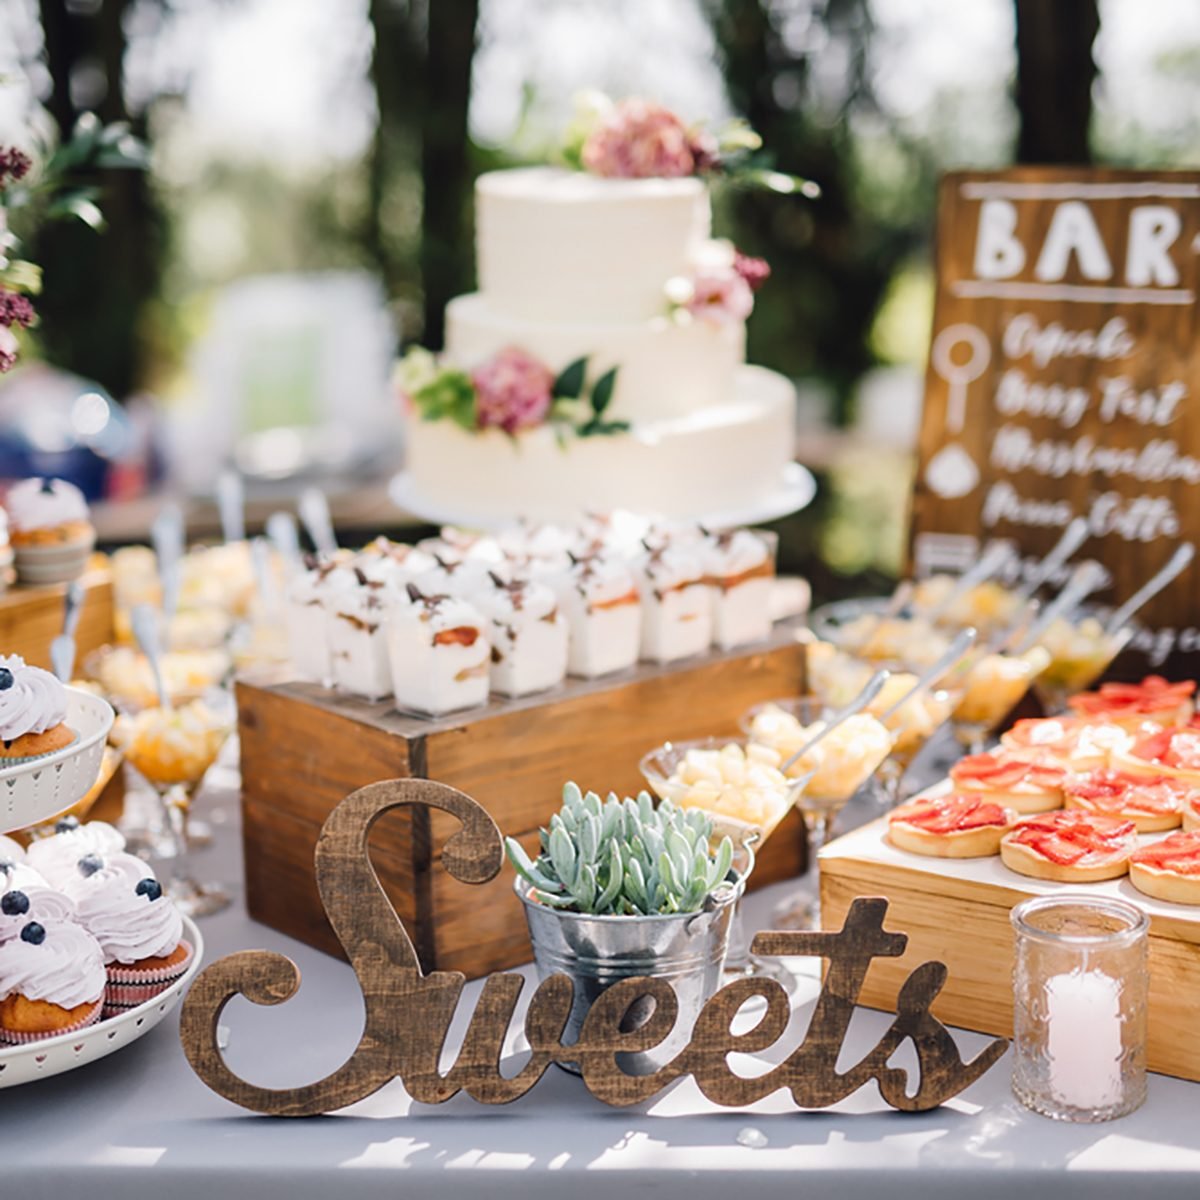 How to Host a Bridal Shower That Every Bride-to-Be Dreams About  Bridal  shower backdrop, Creative bridal shower ideas, Bridal shower desserts table